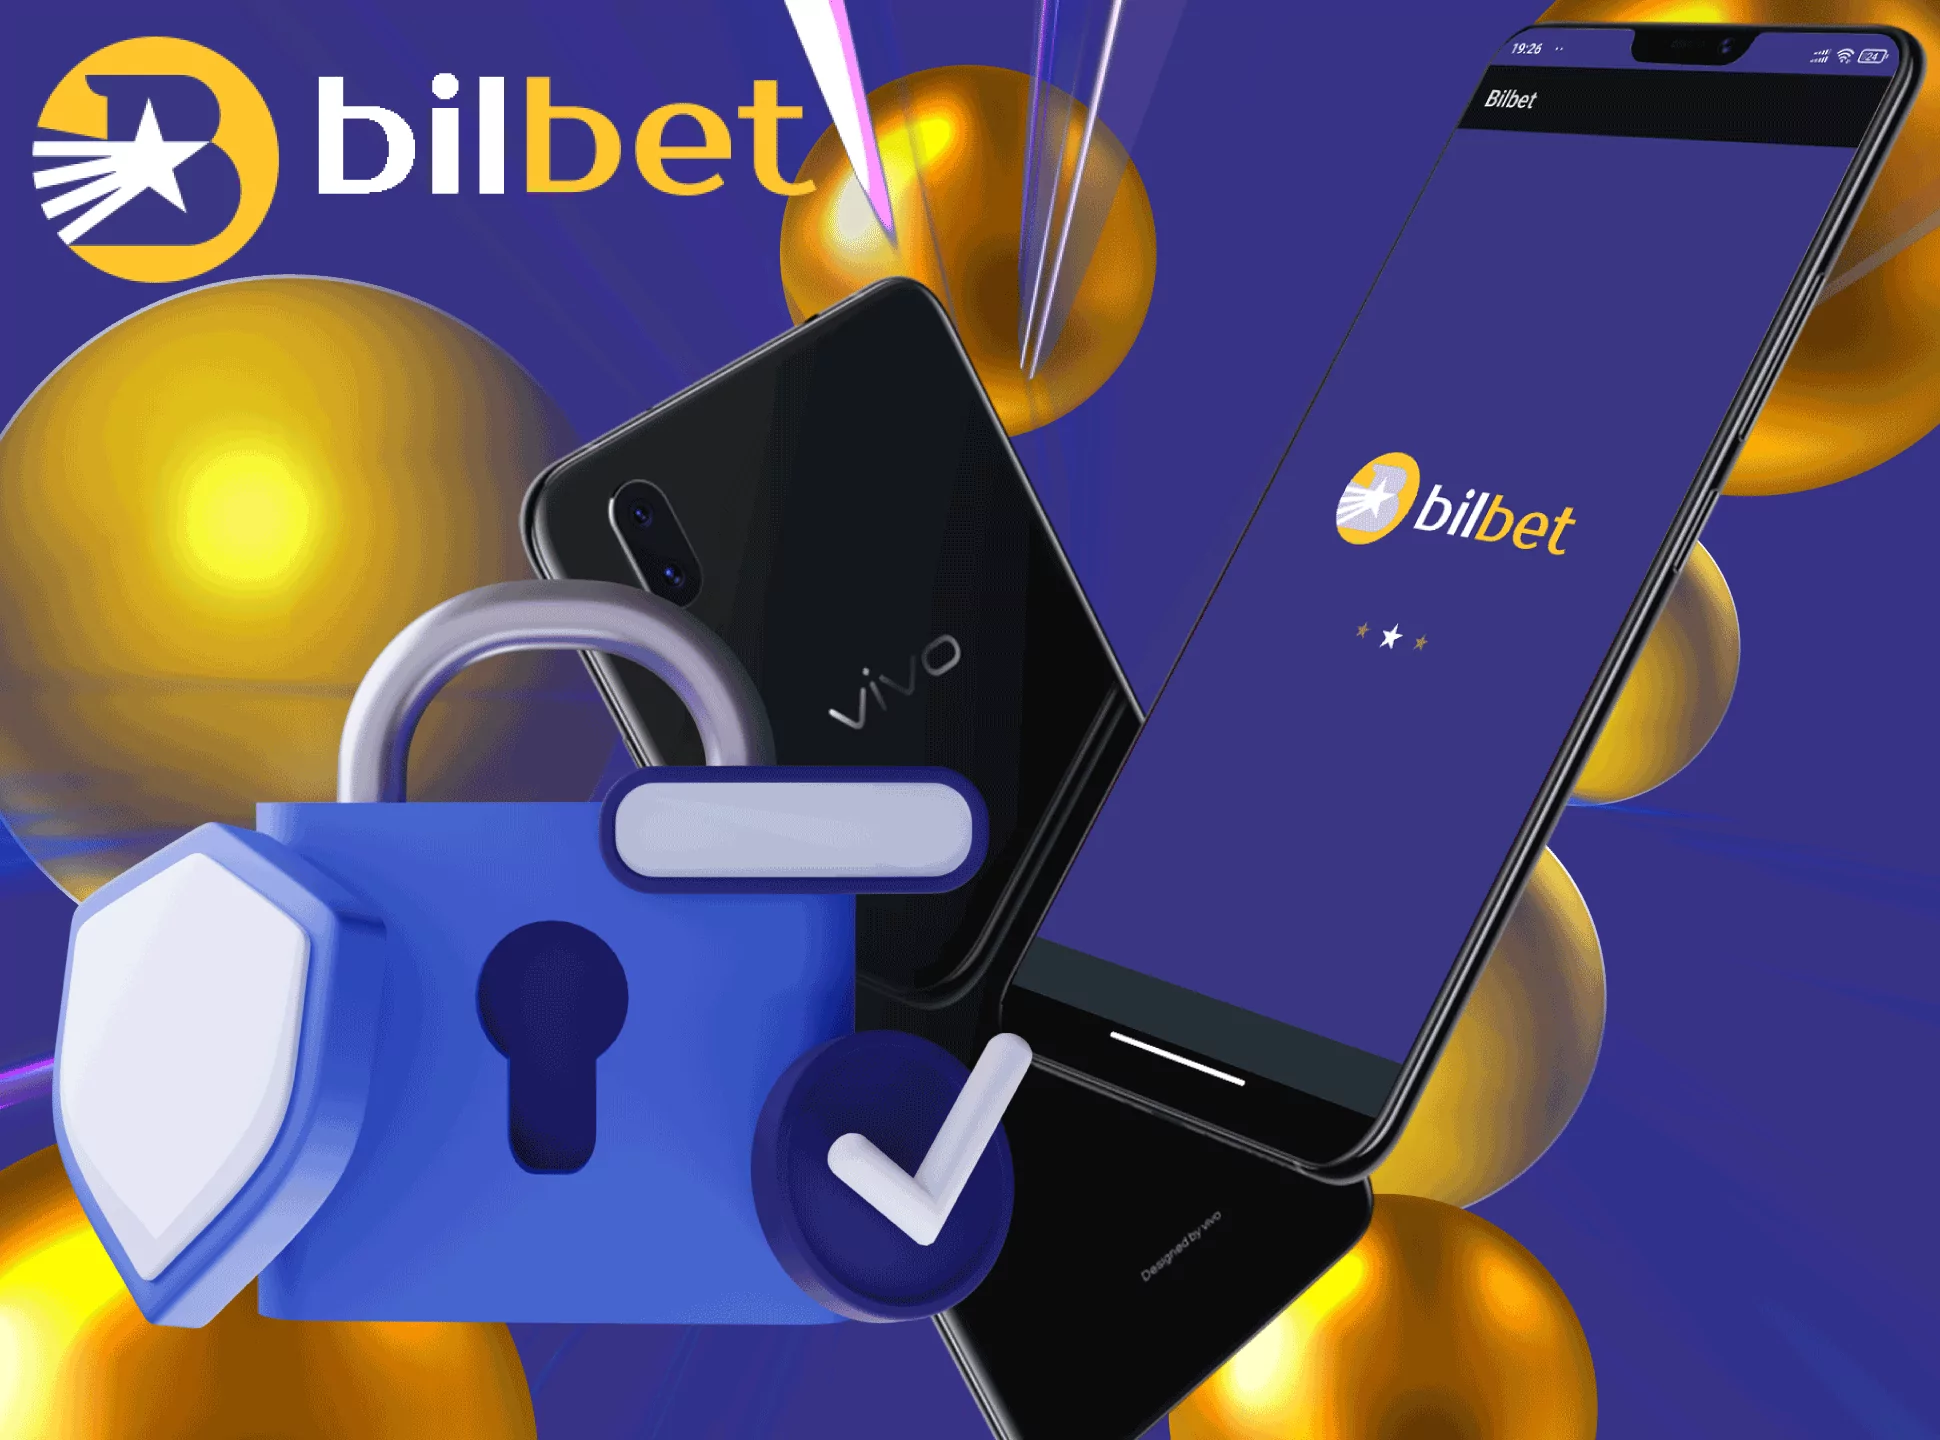 The Bilbet app is a great tool for betting and playing casino games via your smartphone.